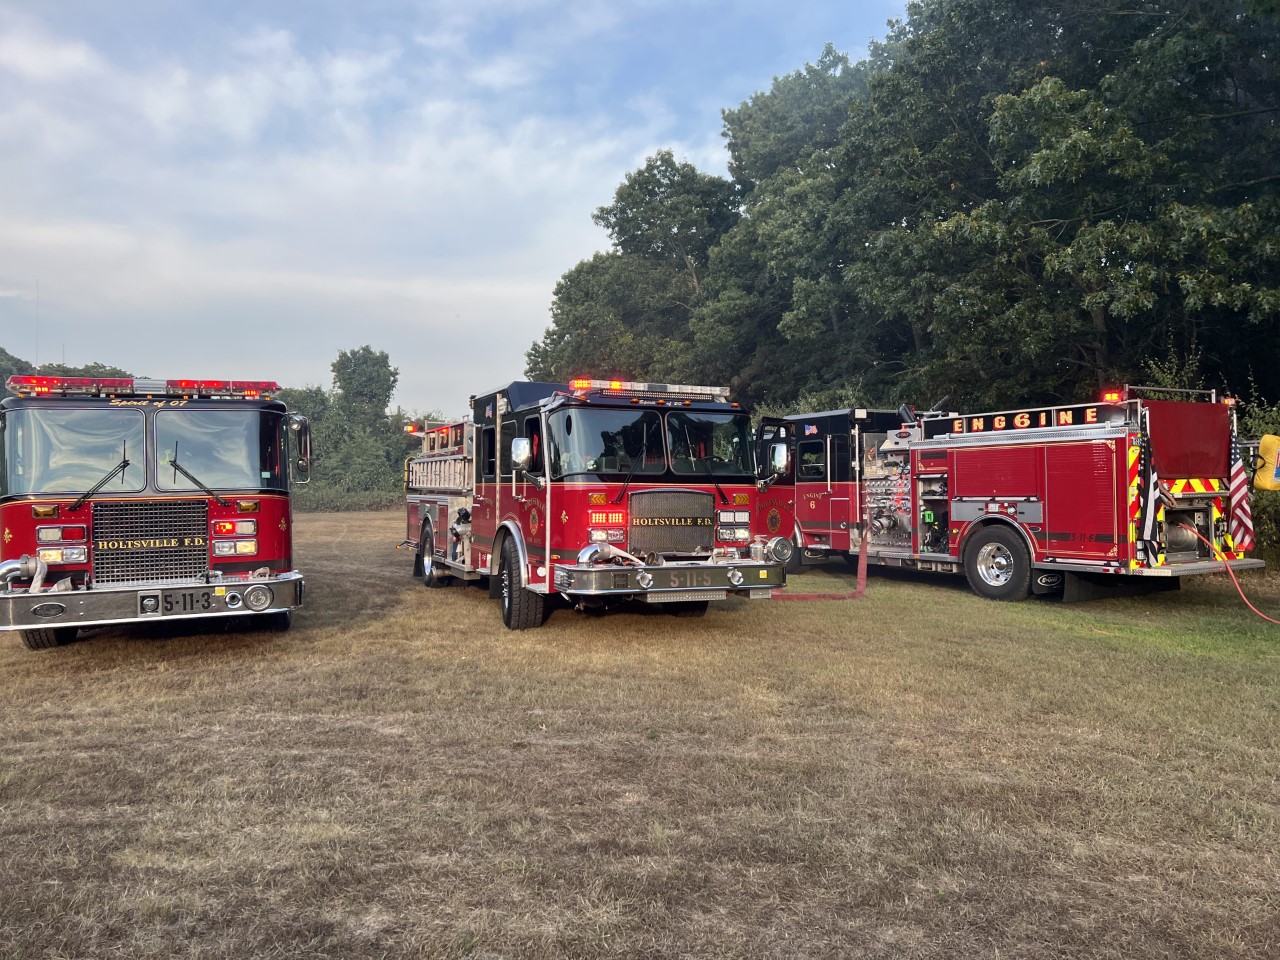 Holtsville FD Responded to a Brush Fire